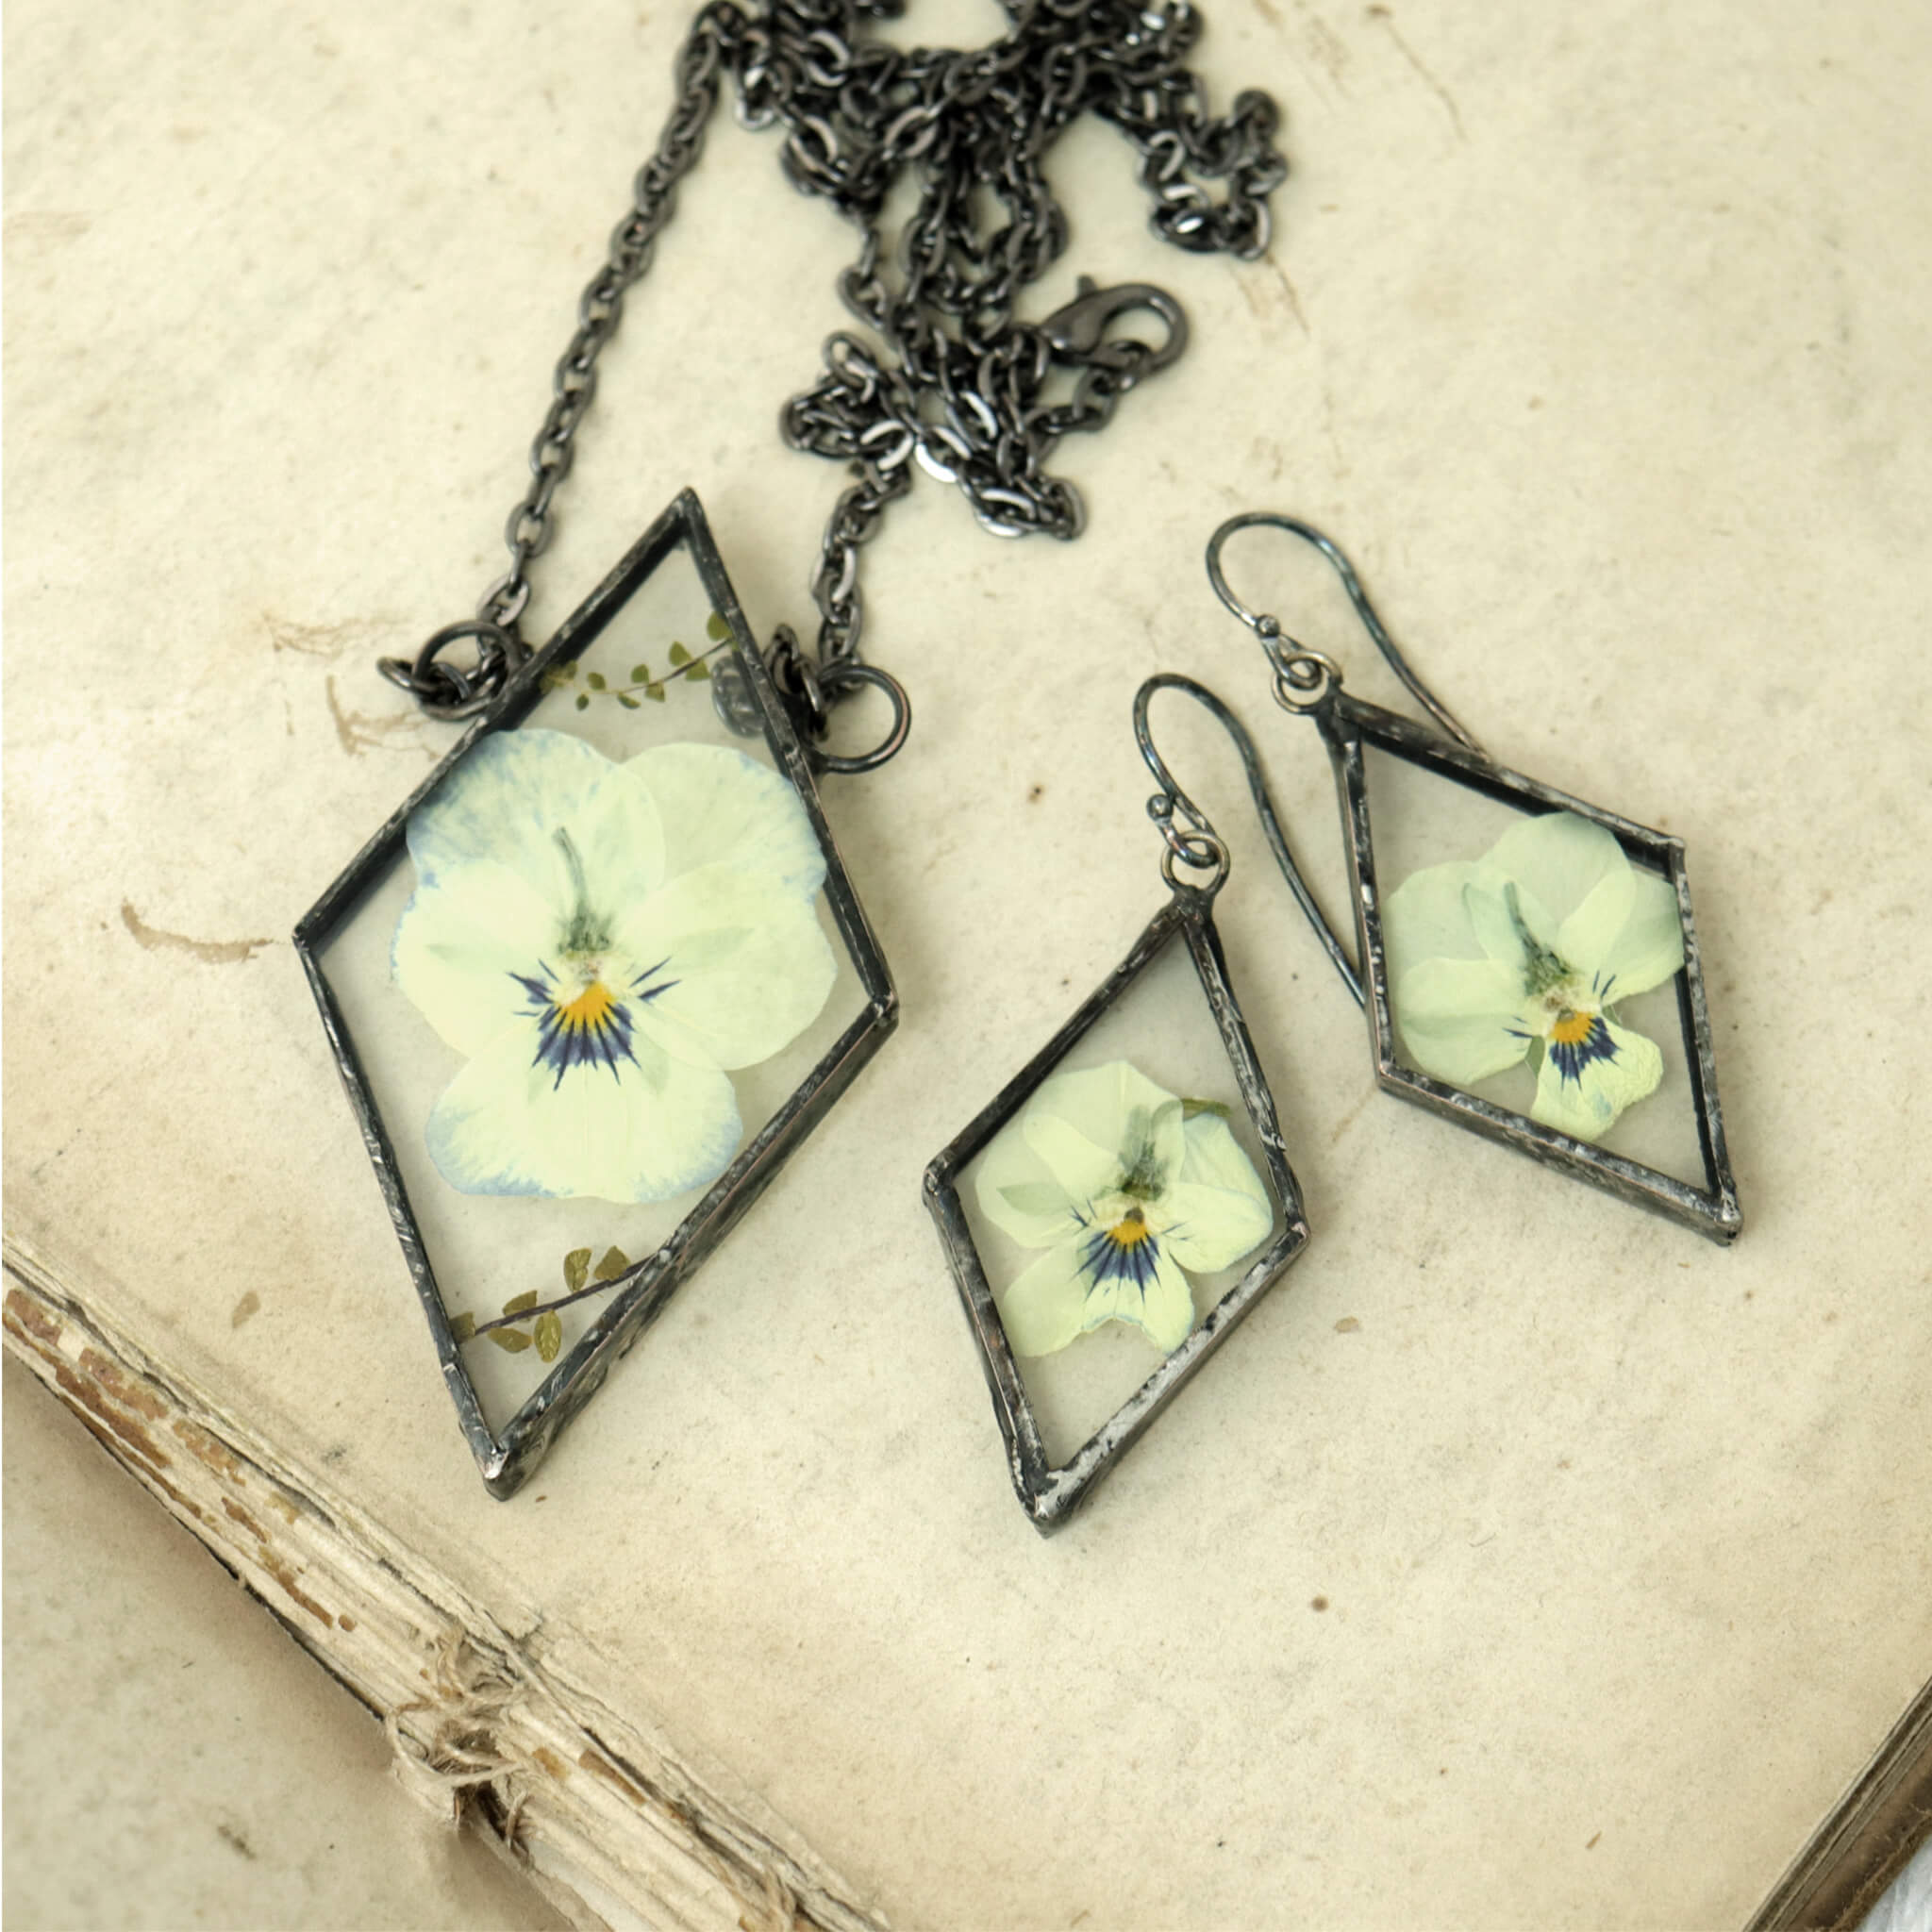 set of pansy earrings and necklace in triangular shape lying on a book